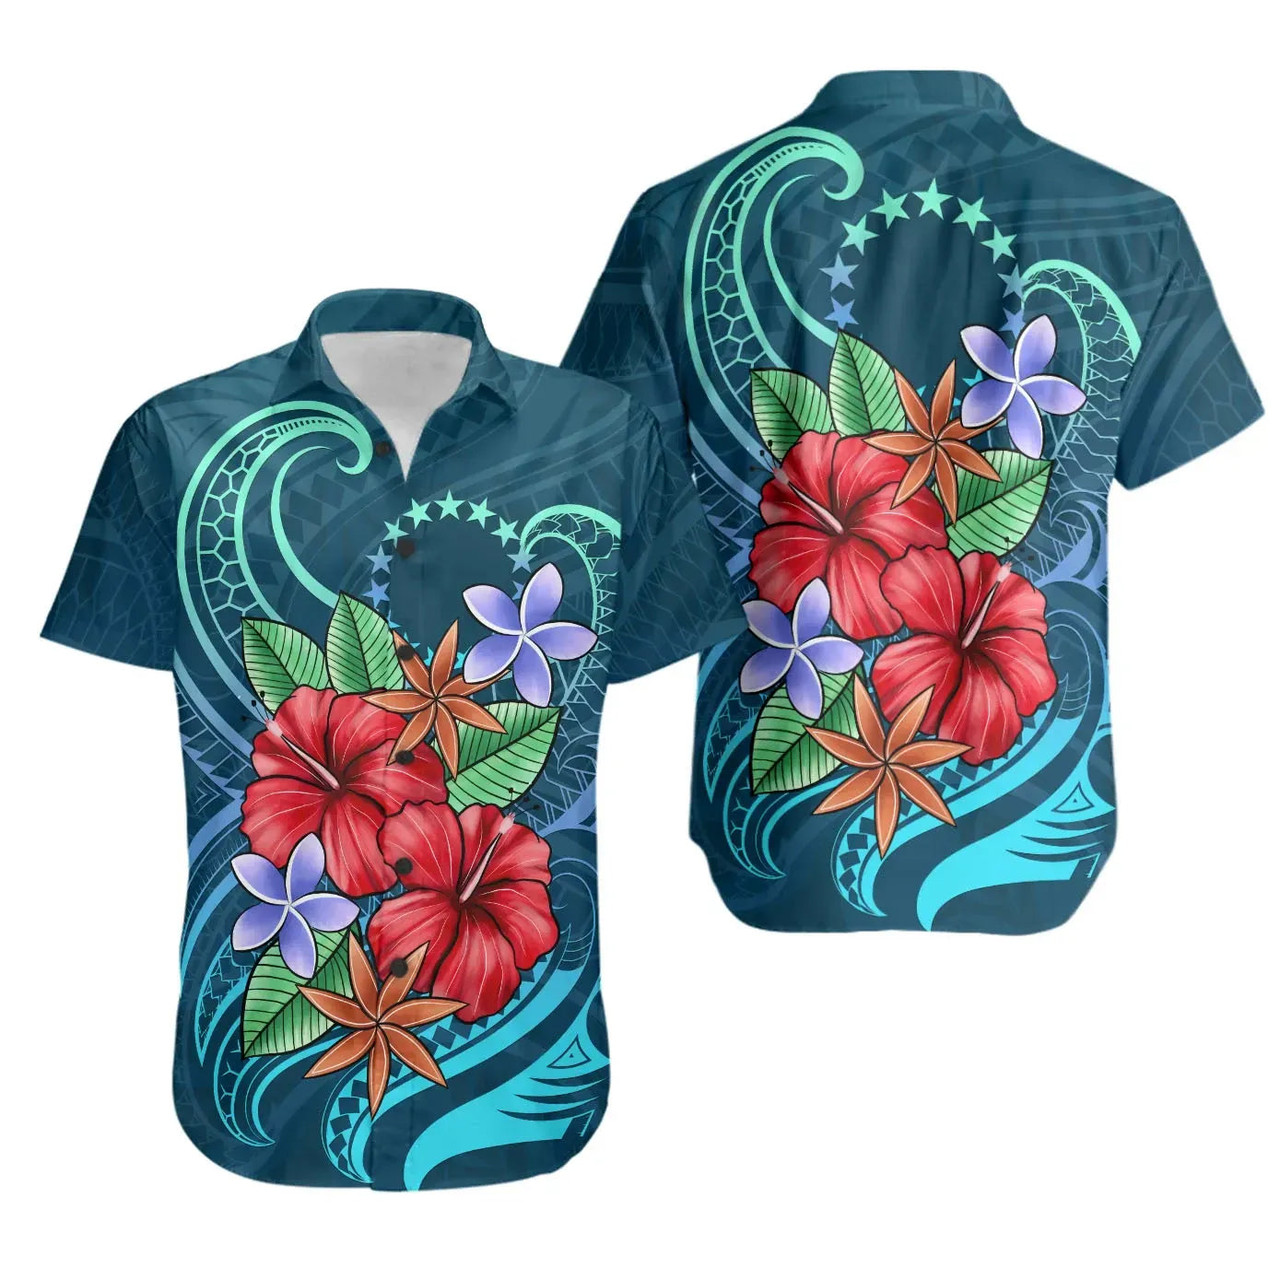 Cook Islands Hawaiian Shirts - Blue Pattern With Tropical Flowers 1